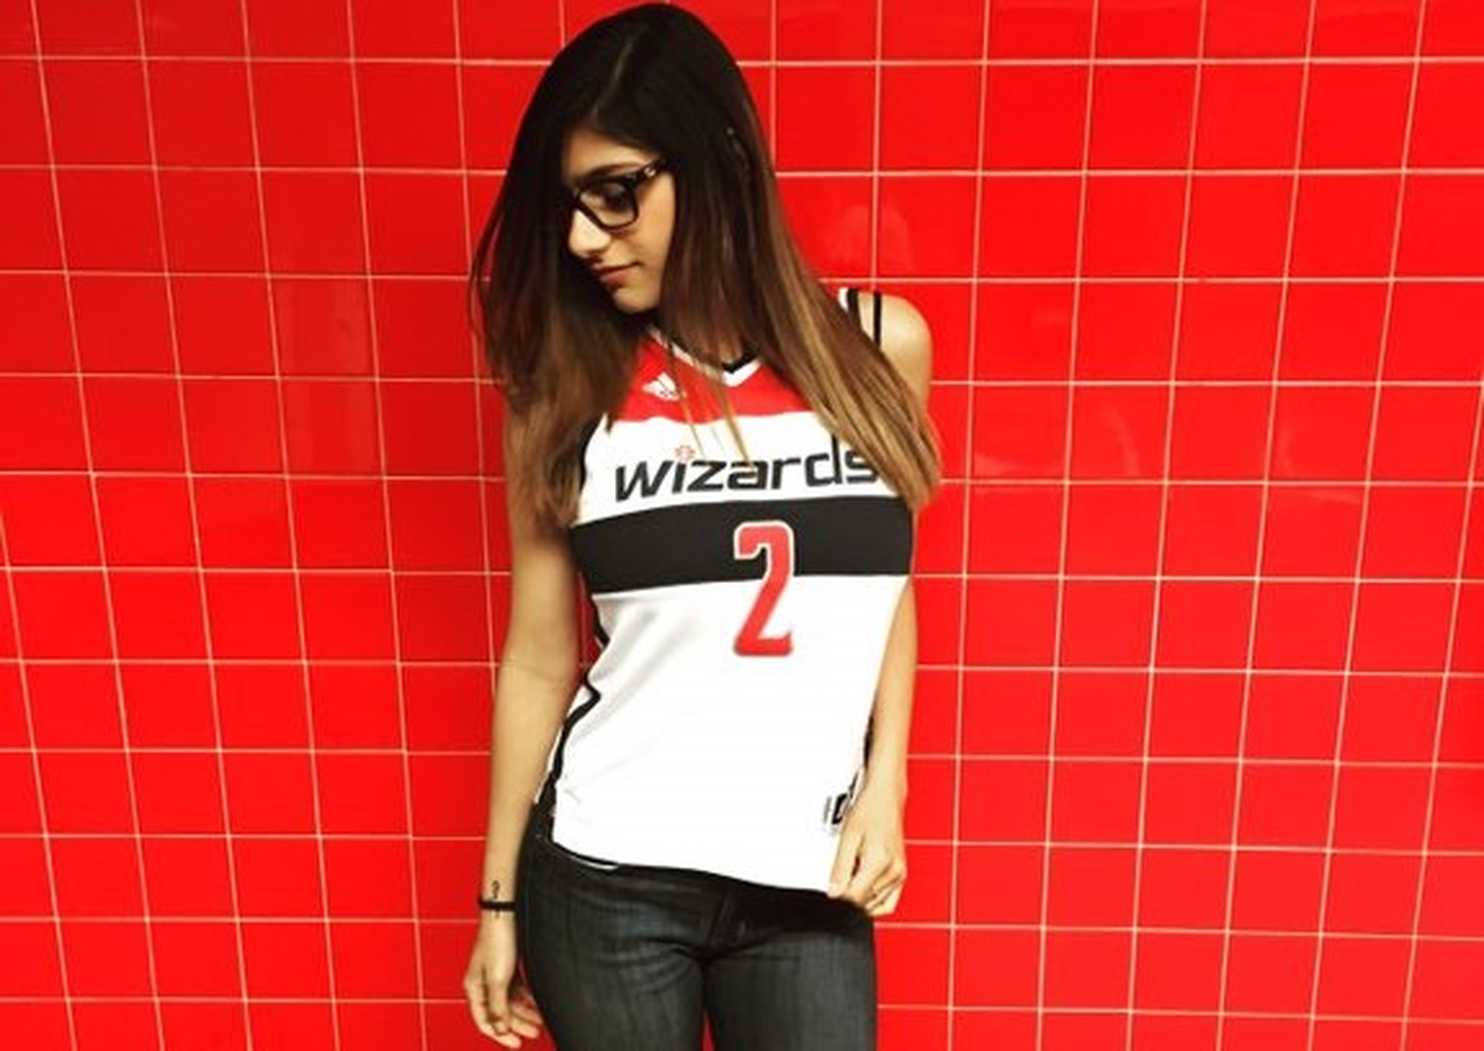 Young Mia Khalifa On Red Tiles Background